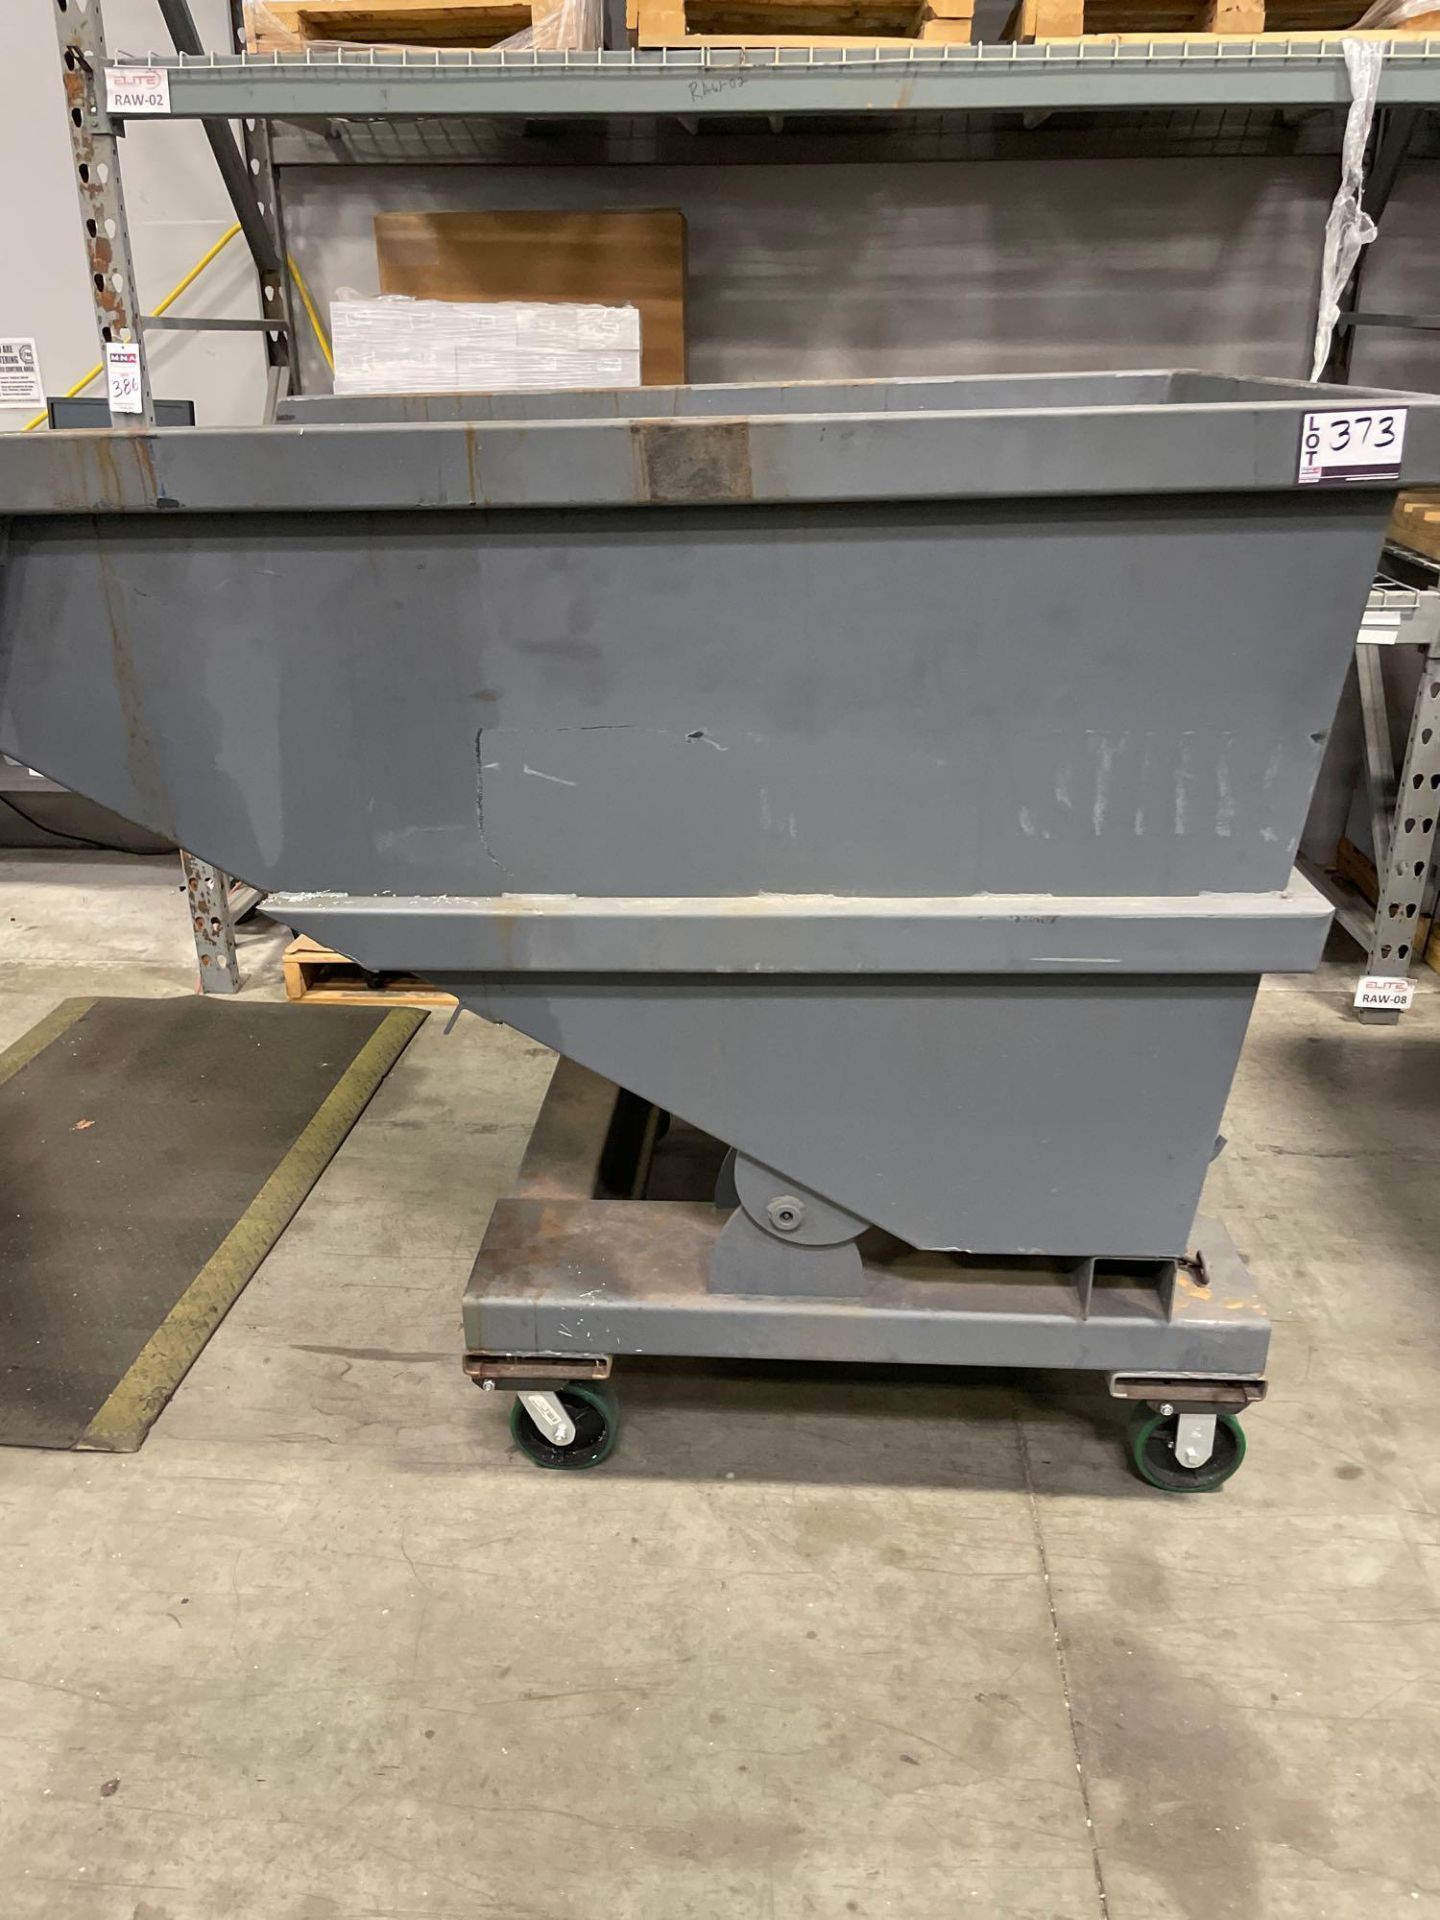 42" x 64" x 40" Dumping Hopper on Casters - Image 3 of 5